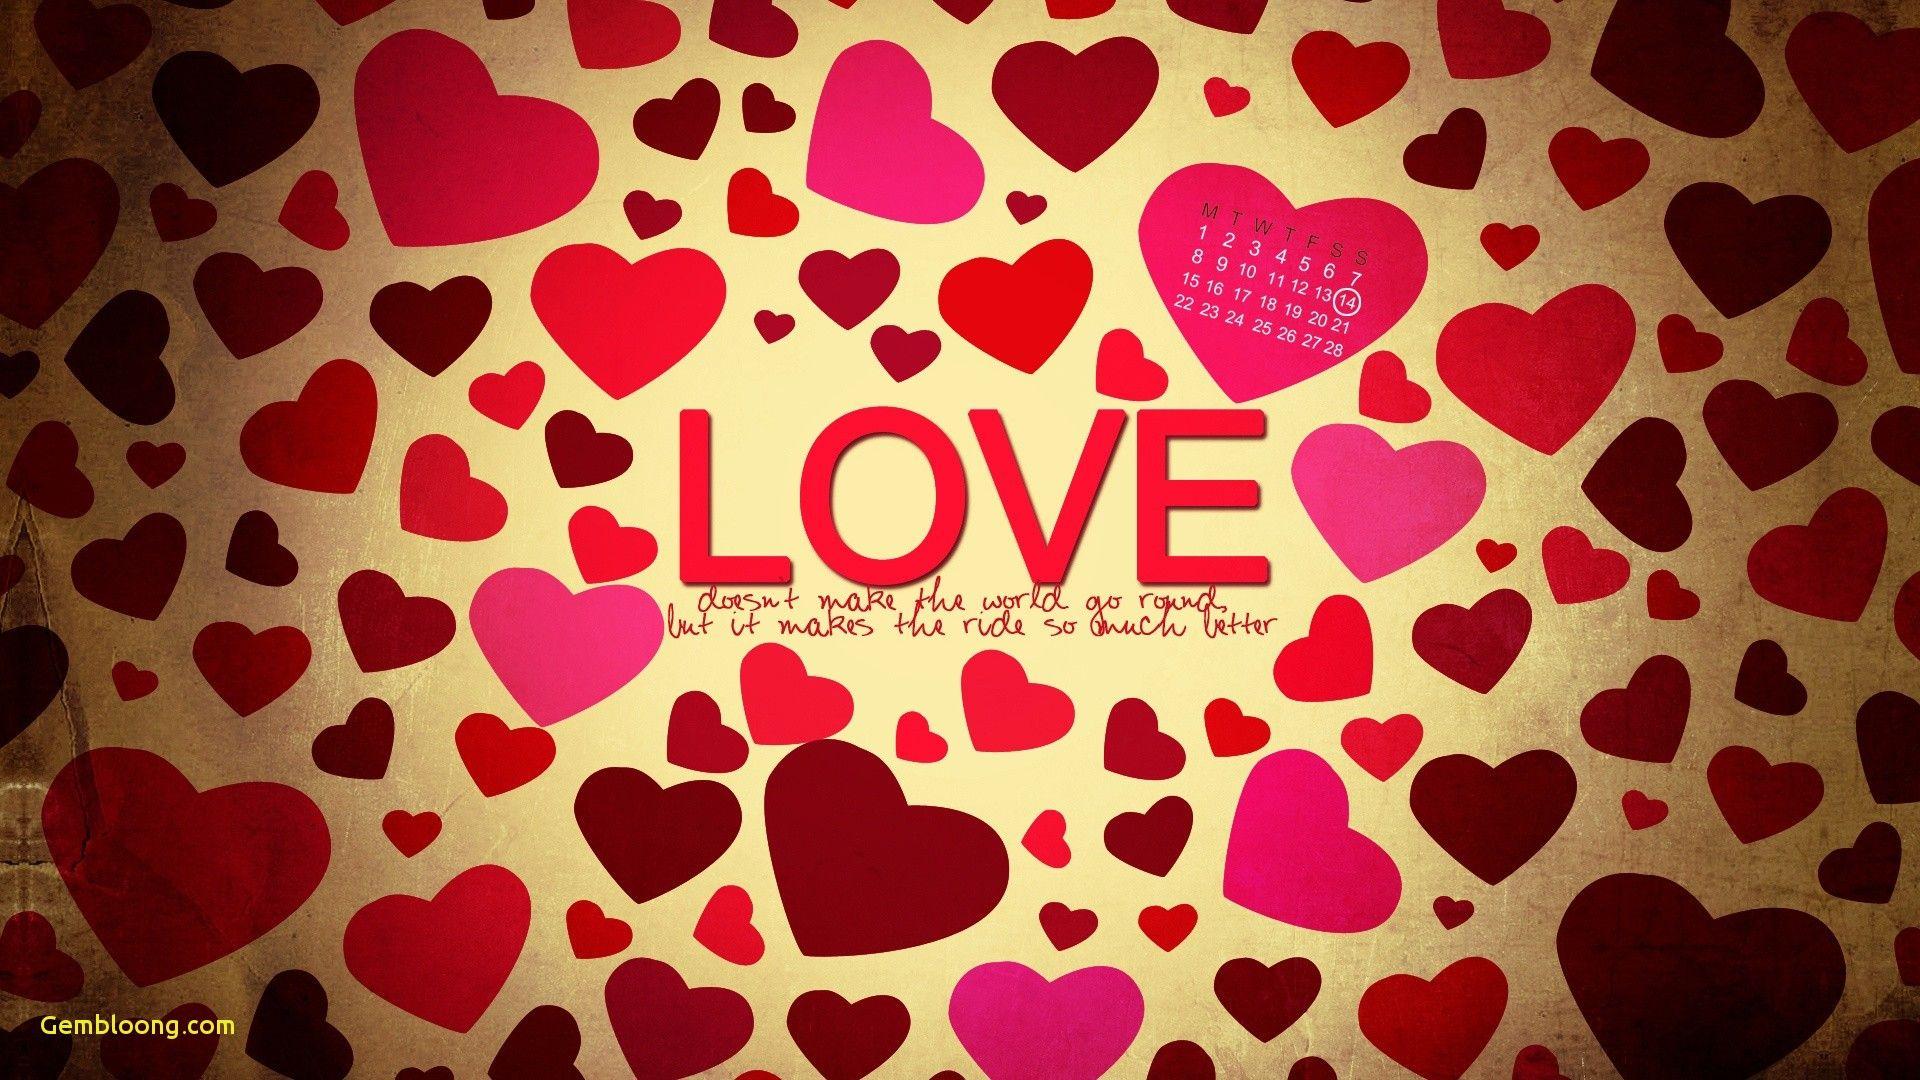 Awesome Heart Wallpapers - Top Free